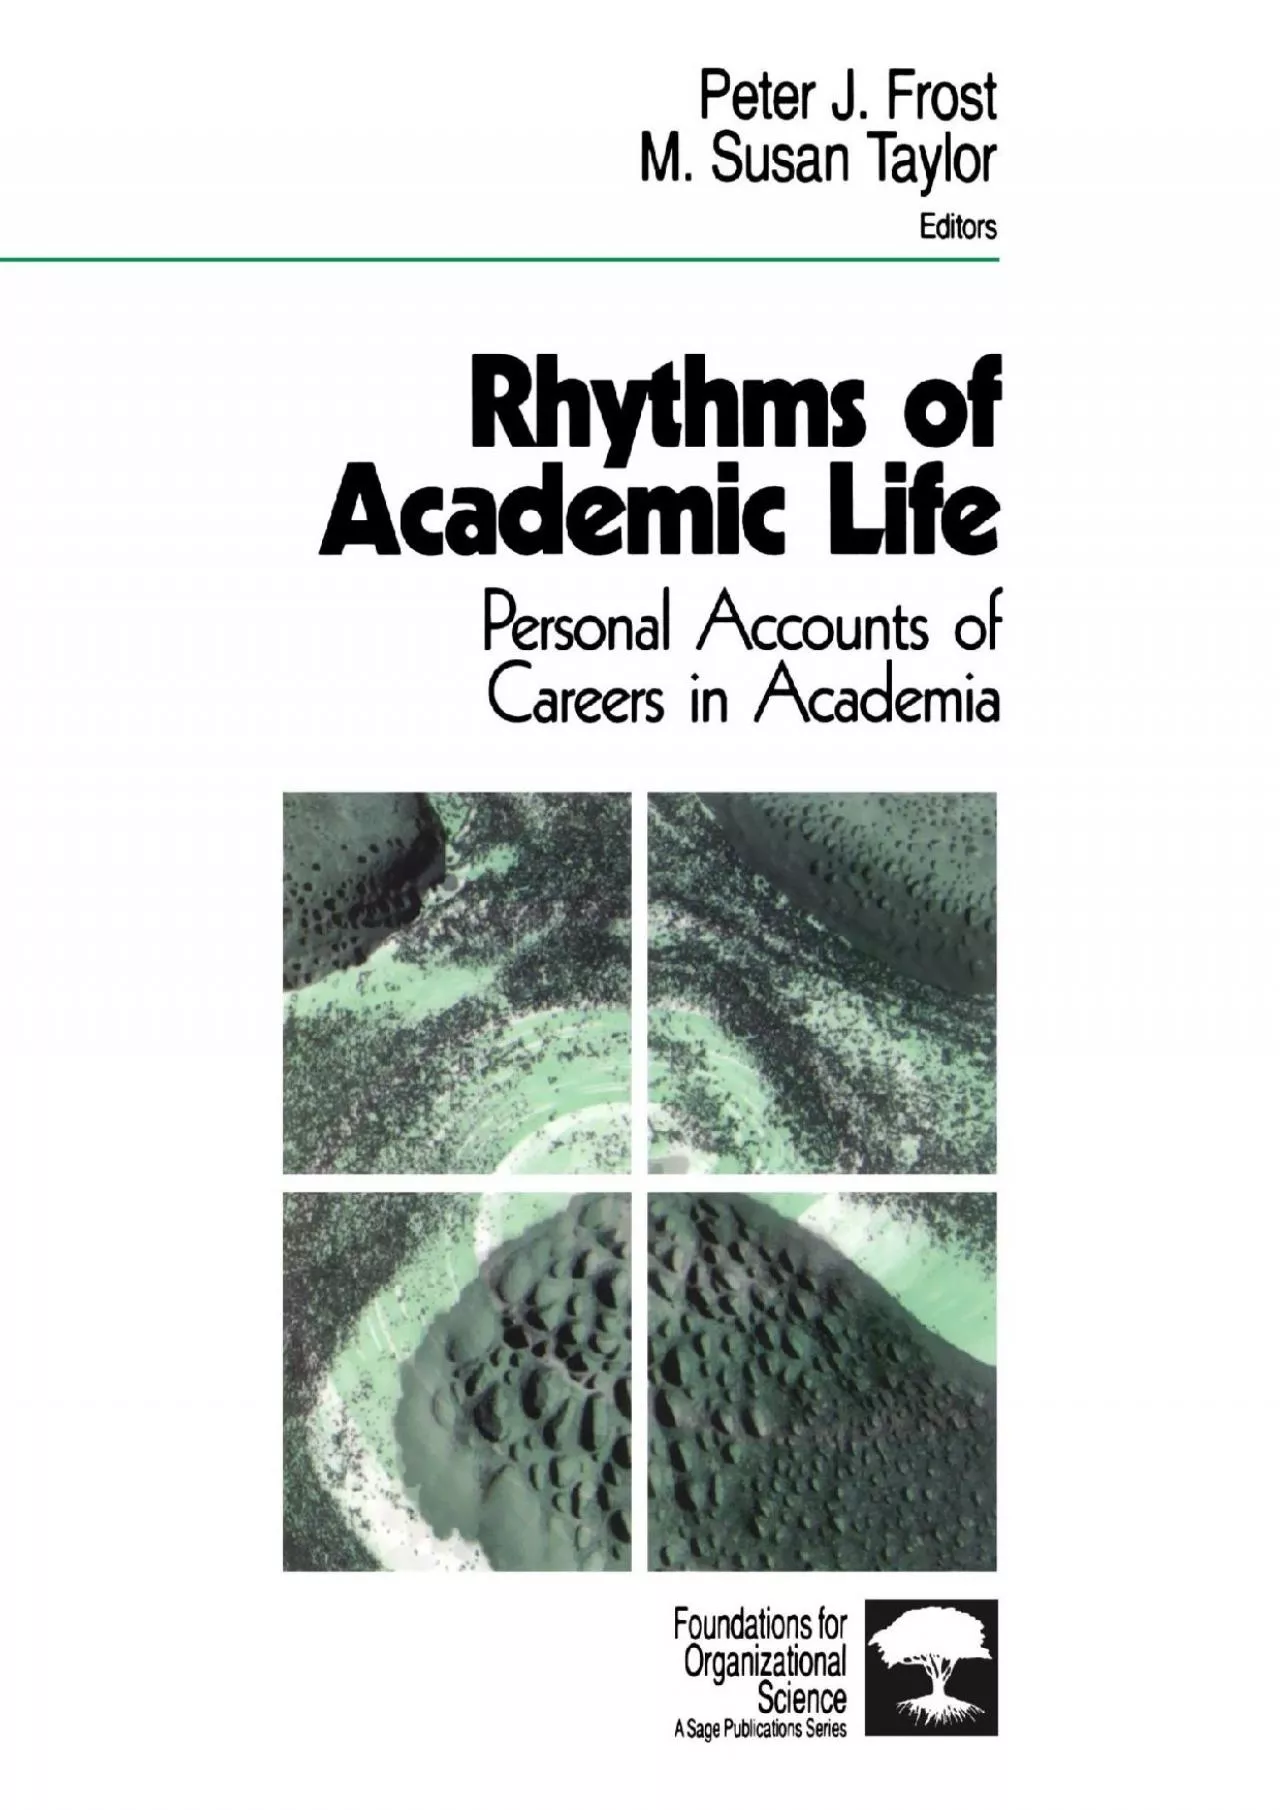 (BOOK)-Rhythms of Academic Life: Personal Accounts of Careers in Academia (Foundations